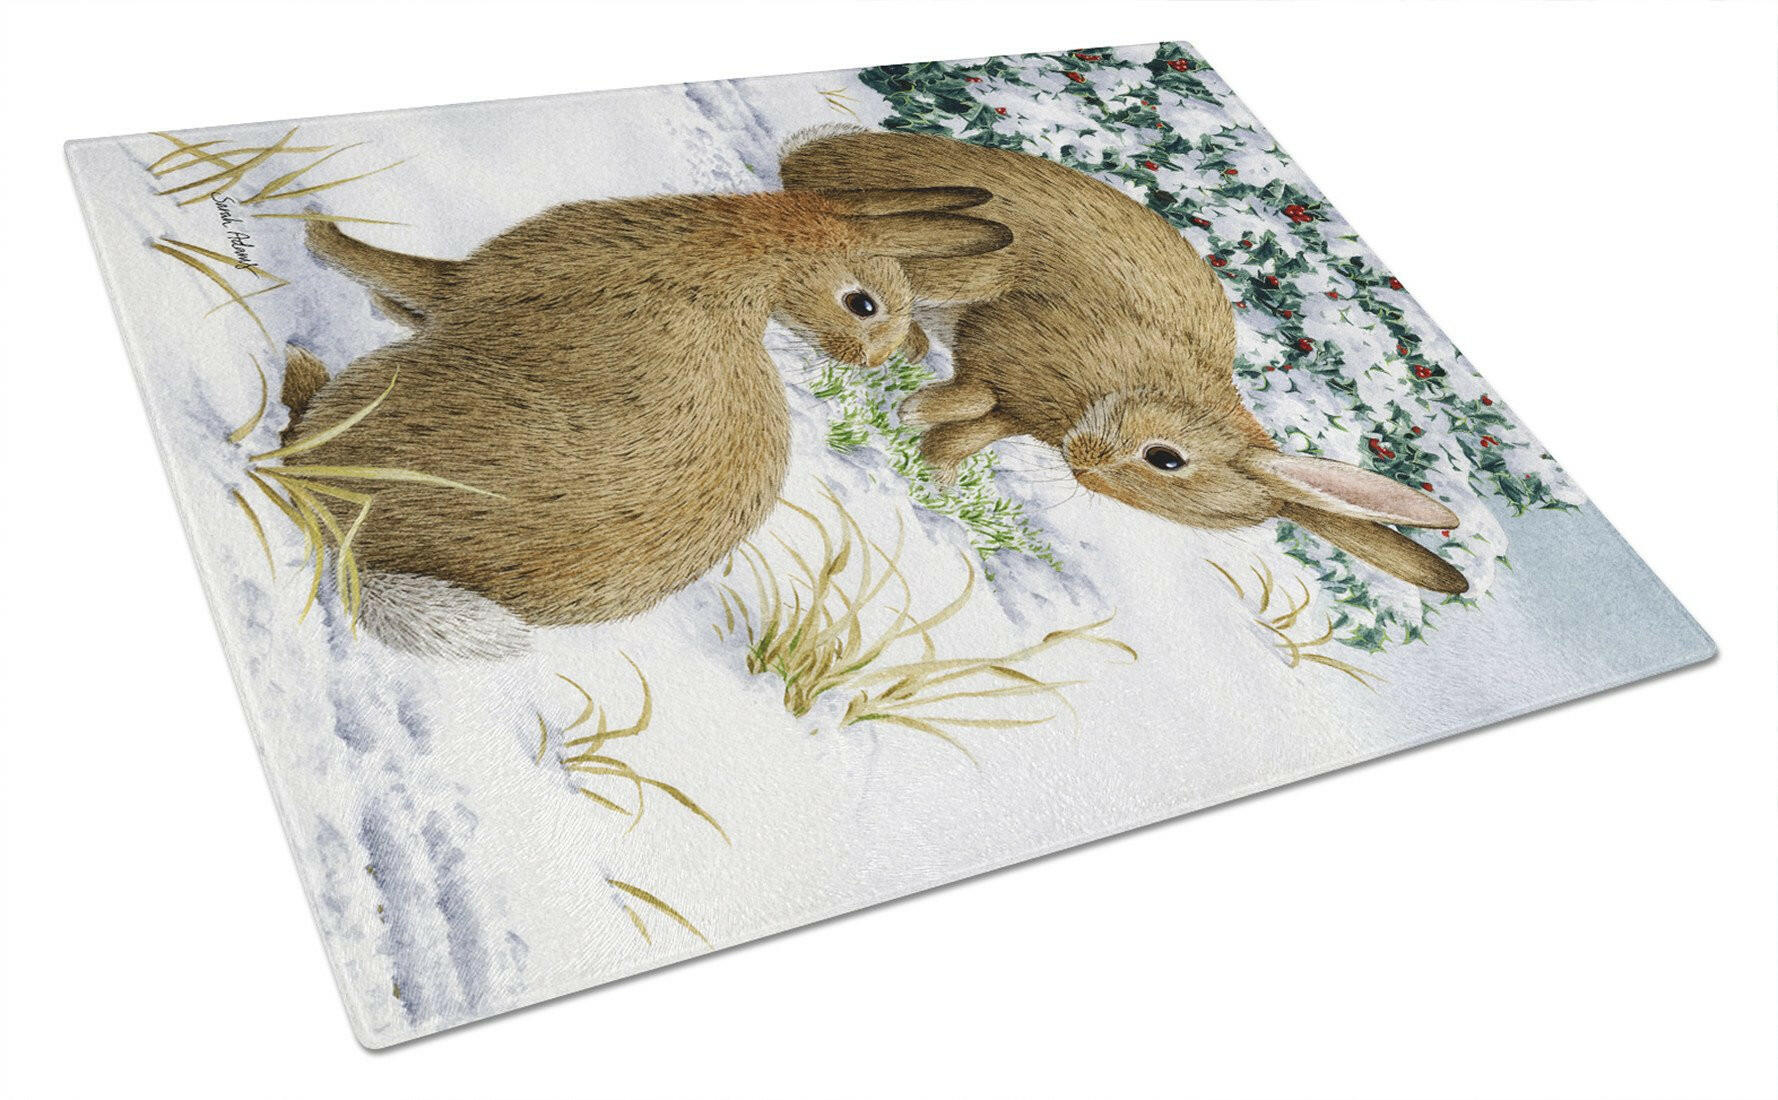 Rabbit searching for Grass in the Snow Glass Cutting Board Large ASA2036LCB by Caroline's Treasures